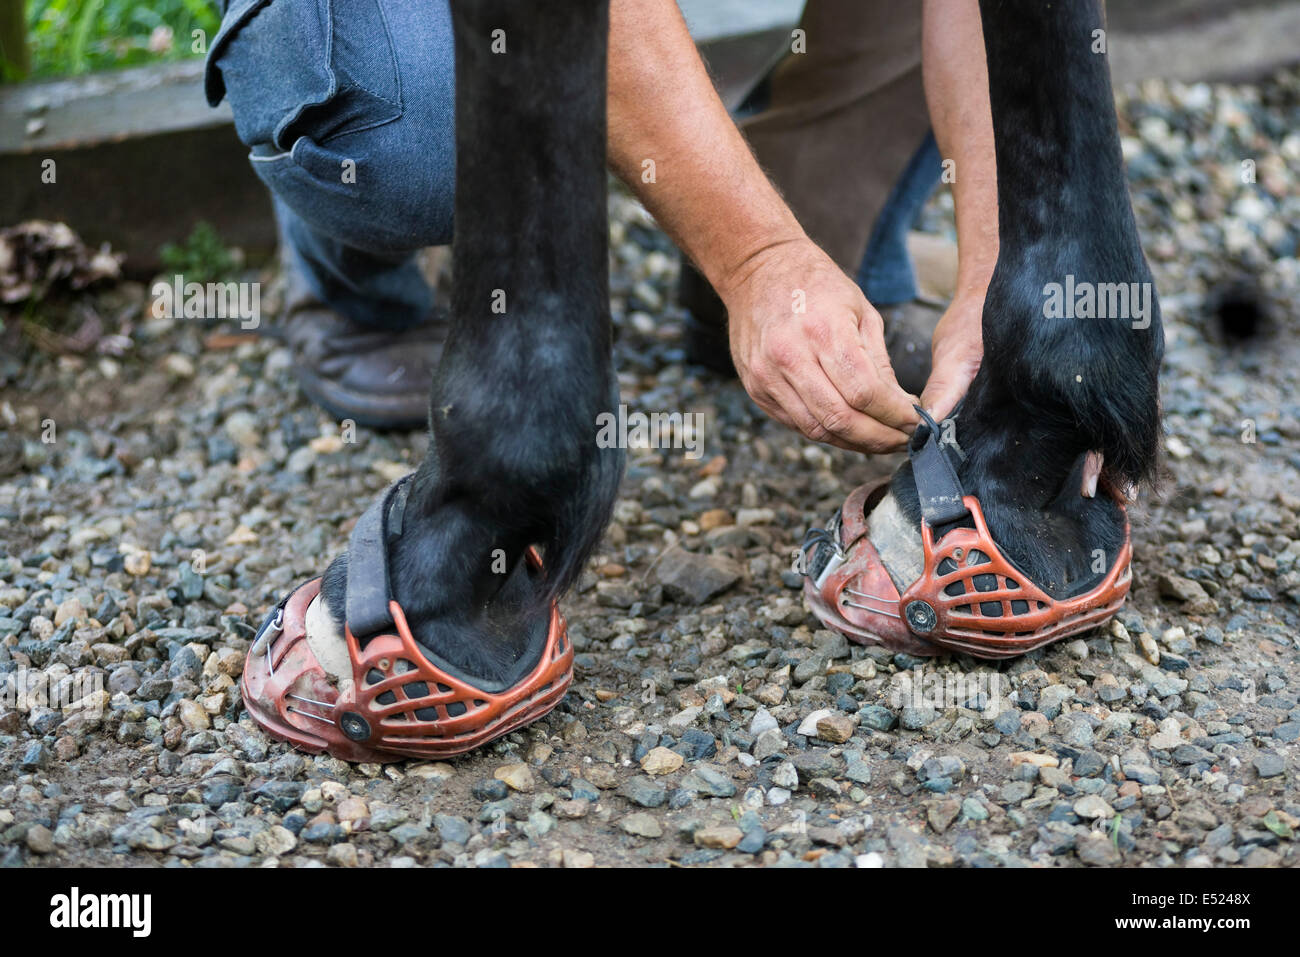 Man puts on horse boots for barefoot hooves Stock Photo